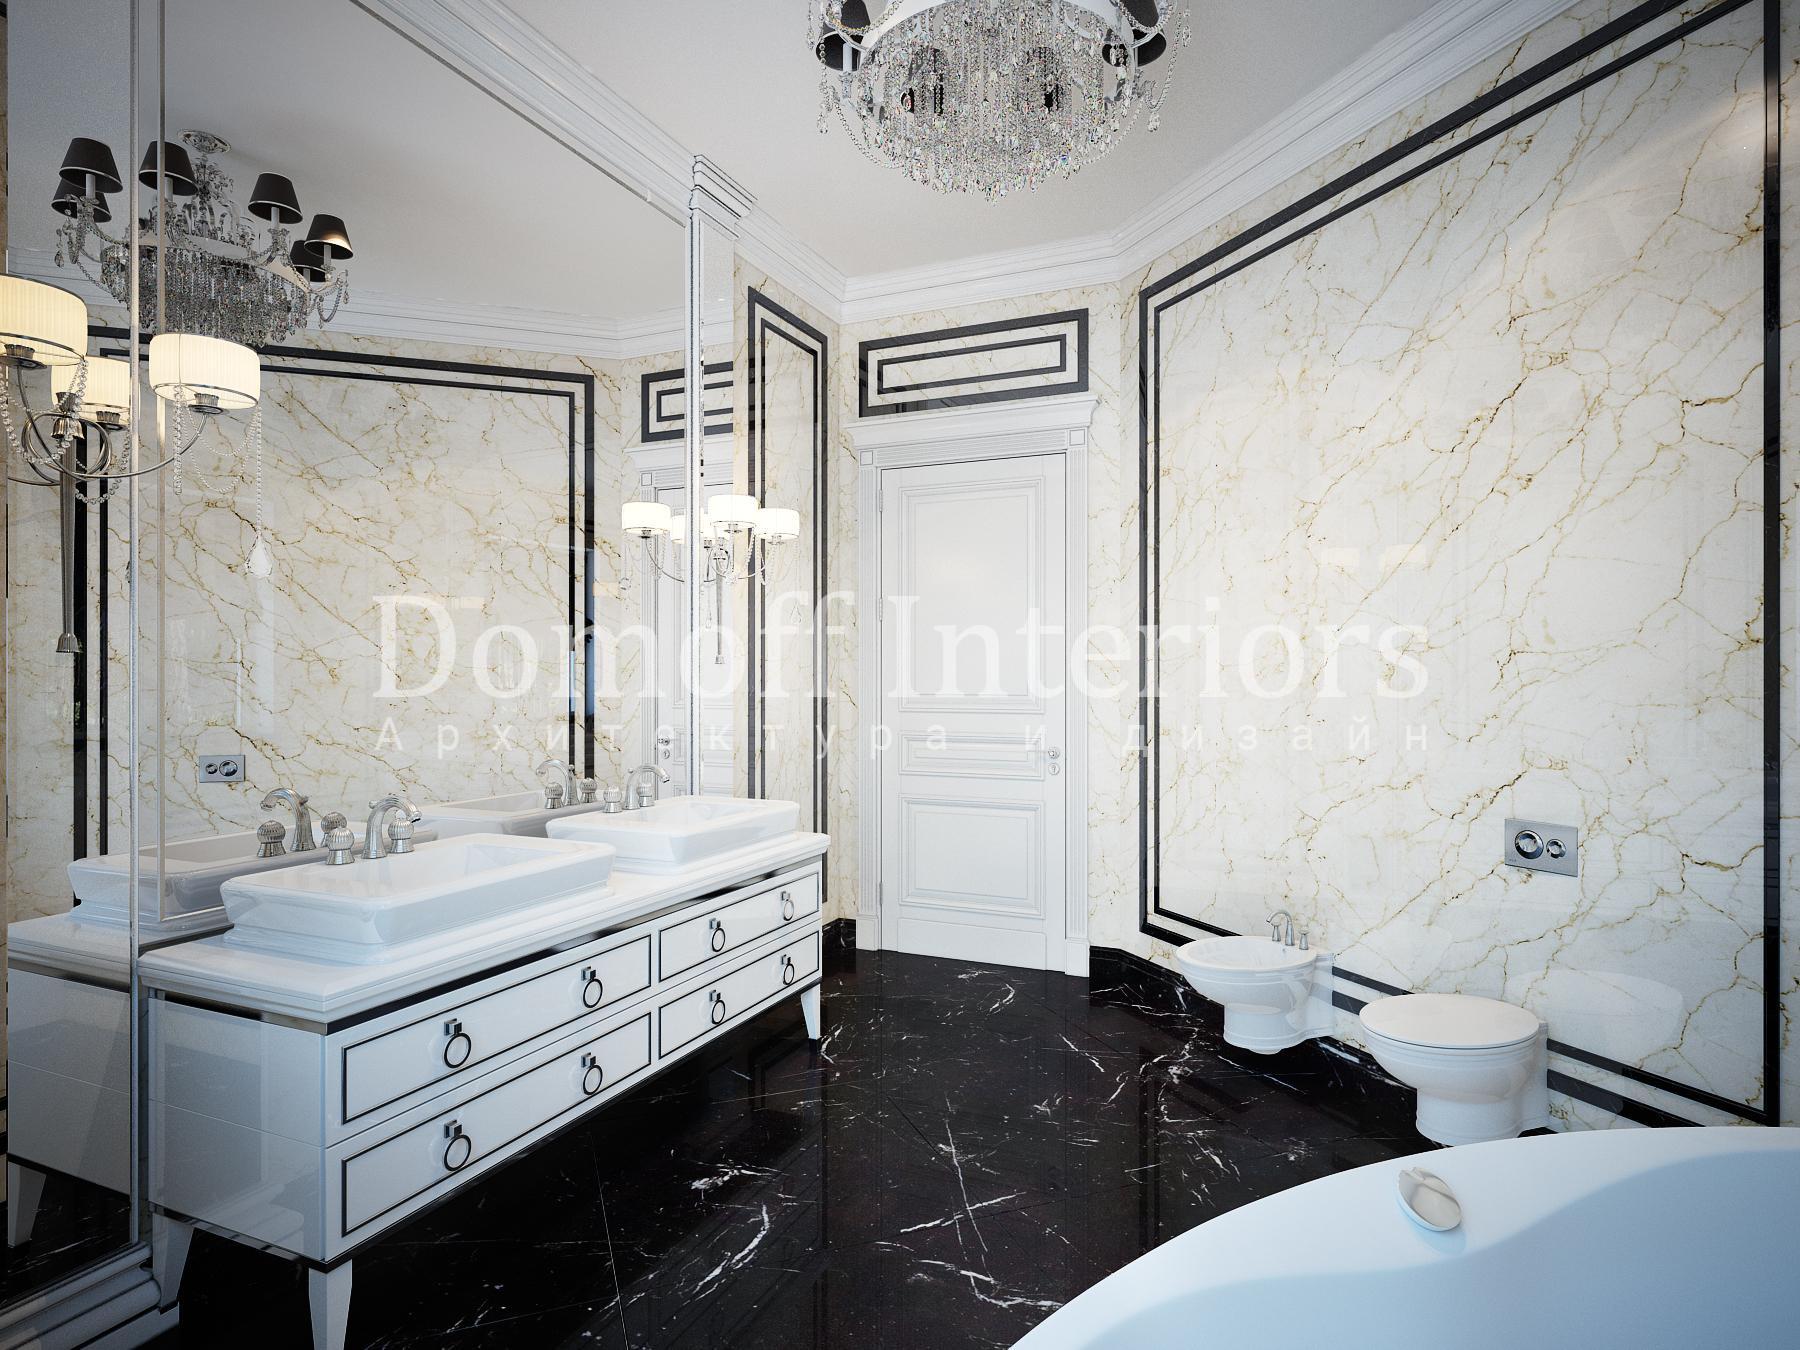 2nd floor guest bathroom made in the style of Contemporary classics